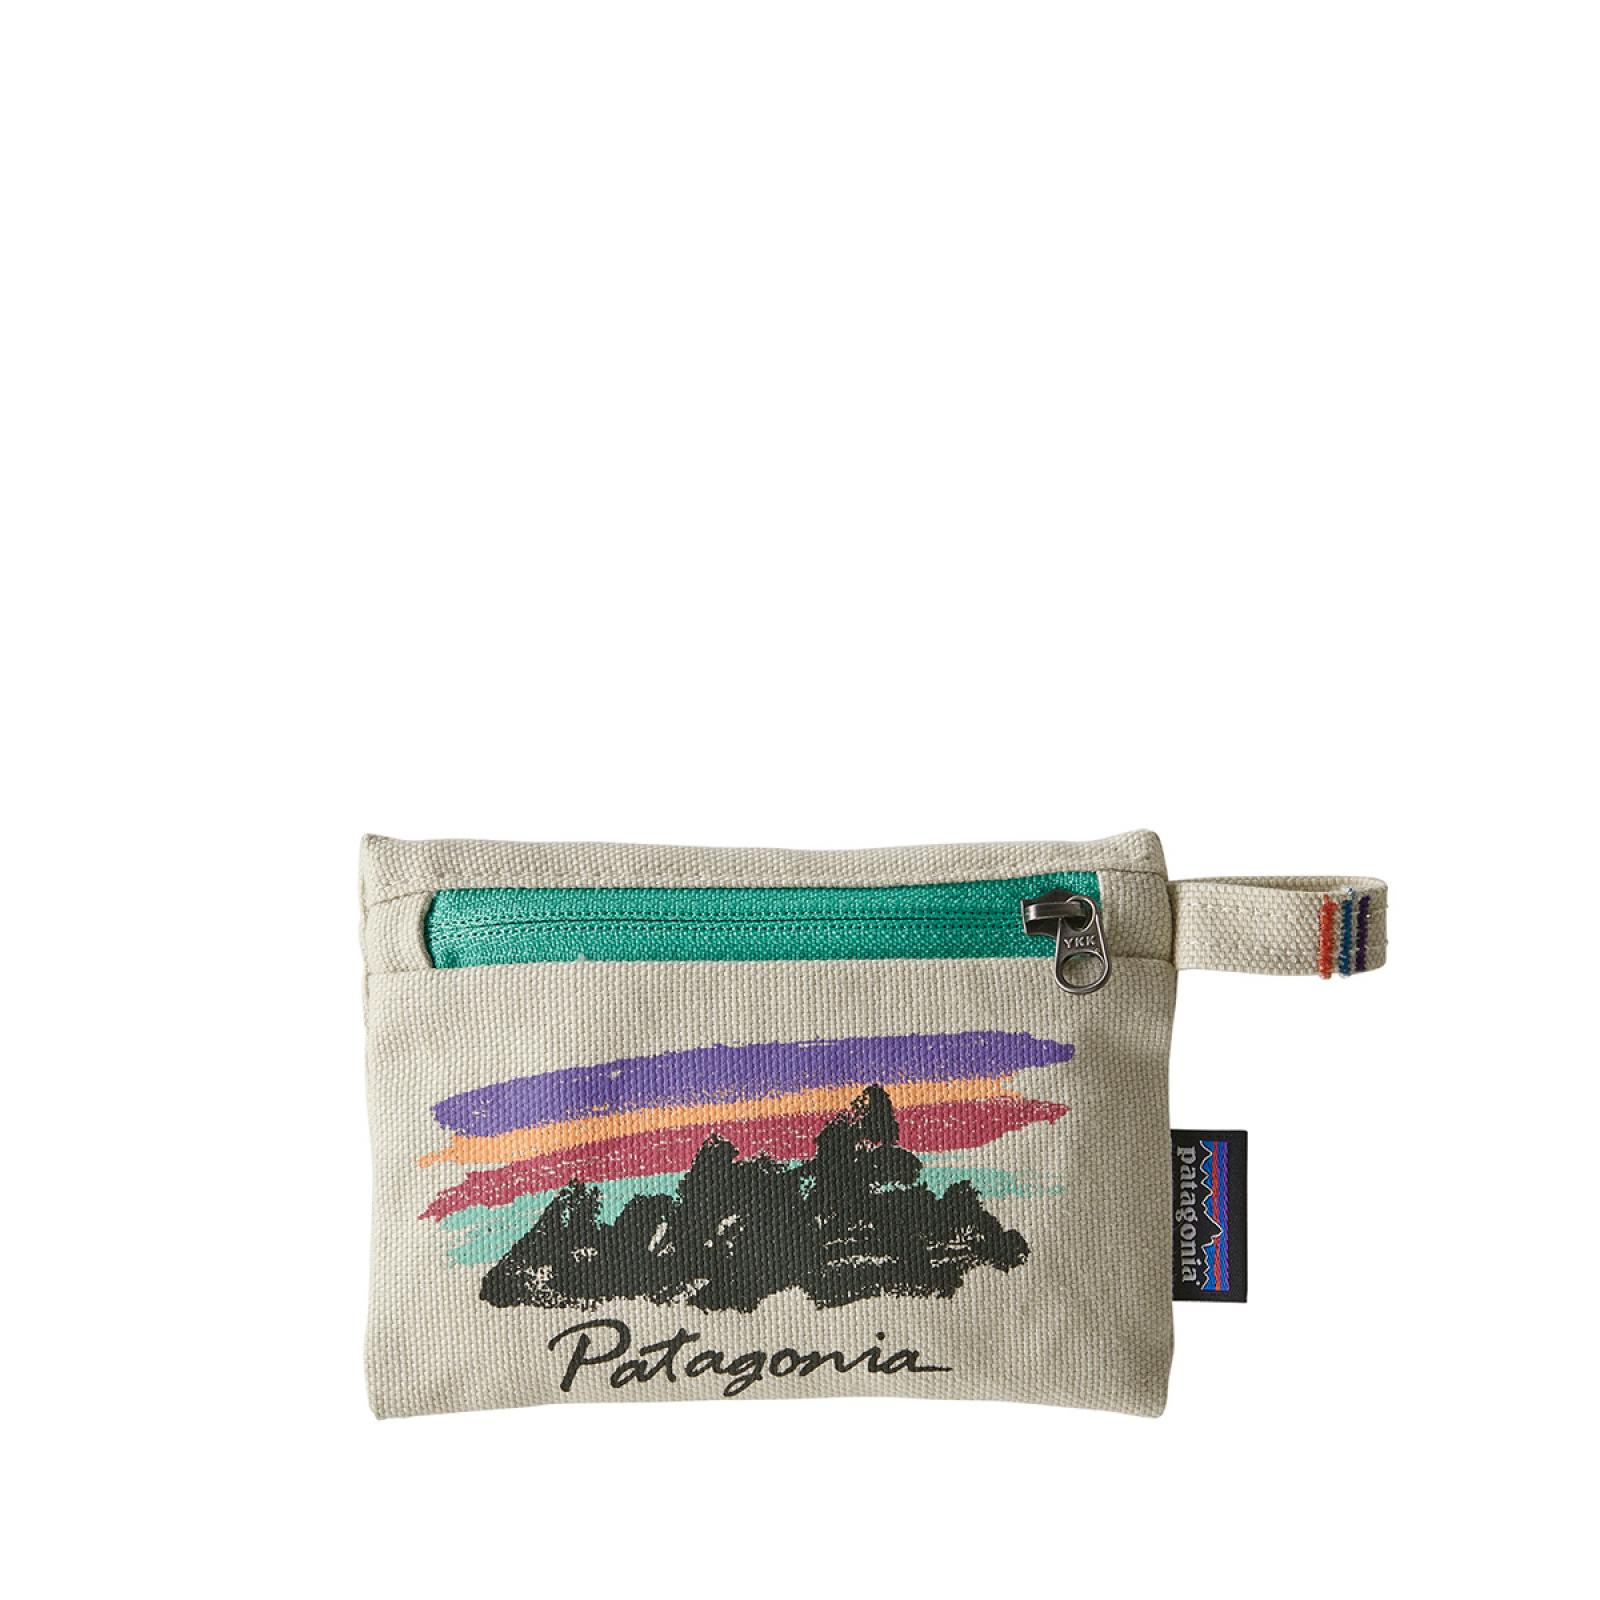 Patagonia Small Zippered Pouch - 1